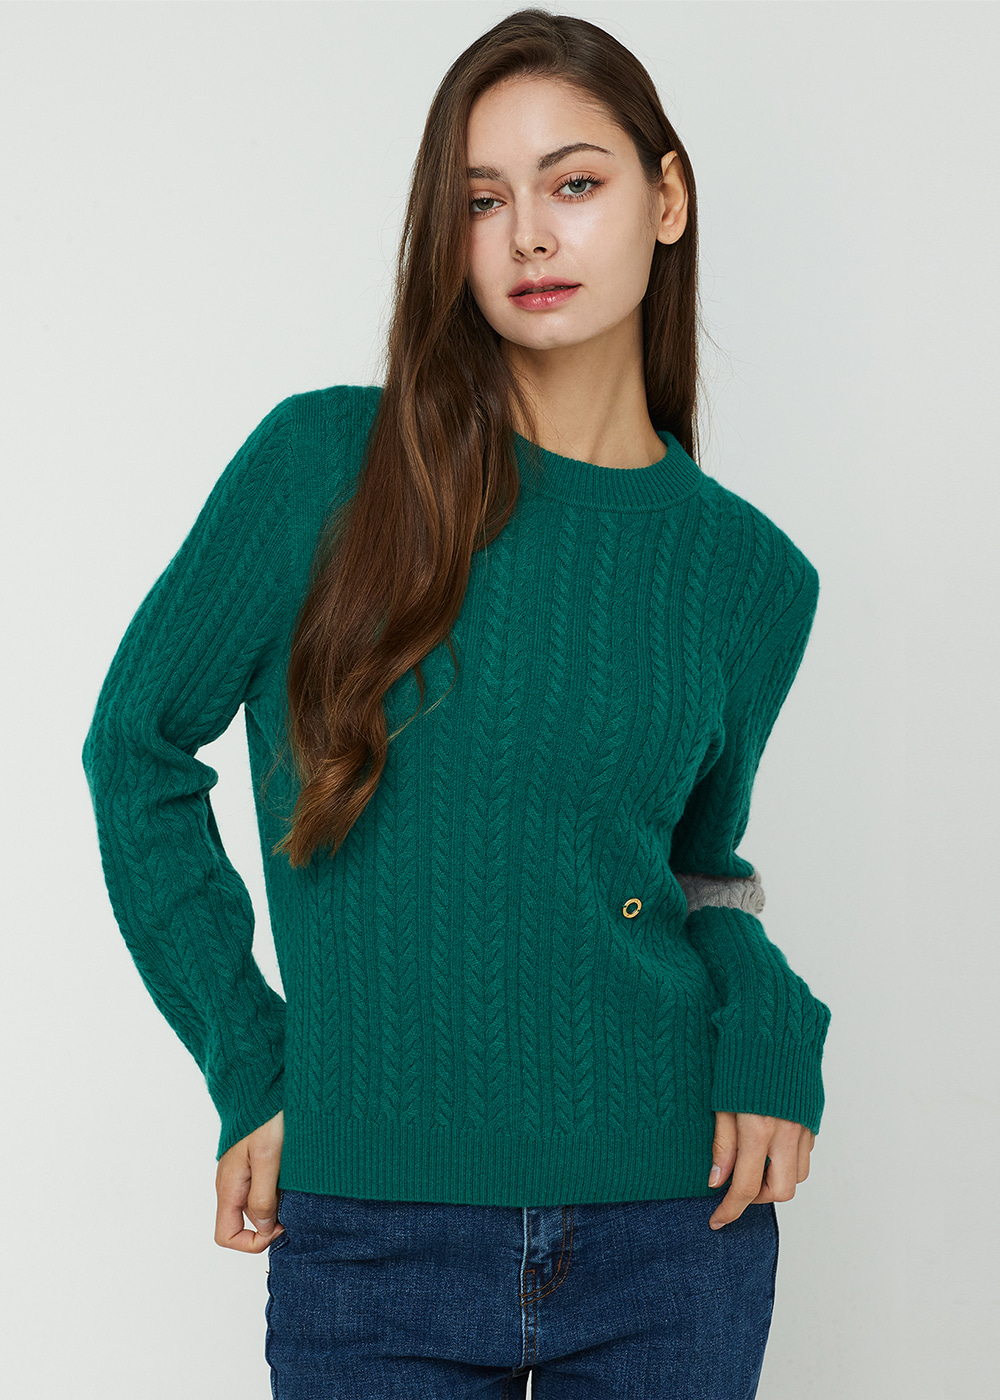 Cable pullover (pine tree) 20%